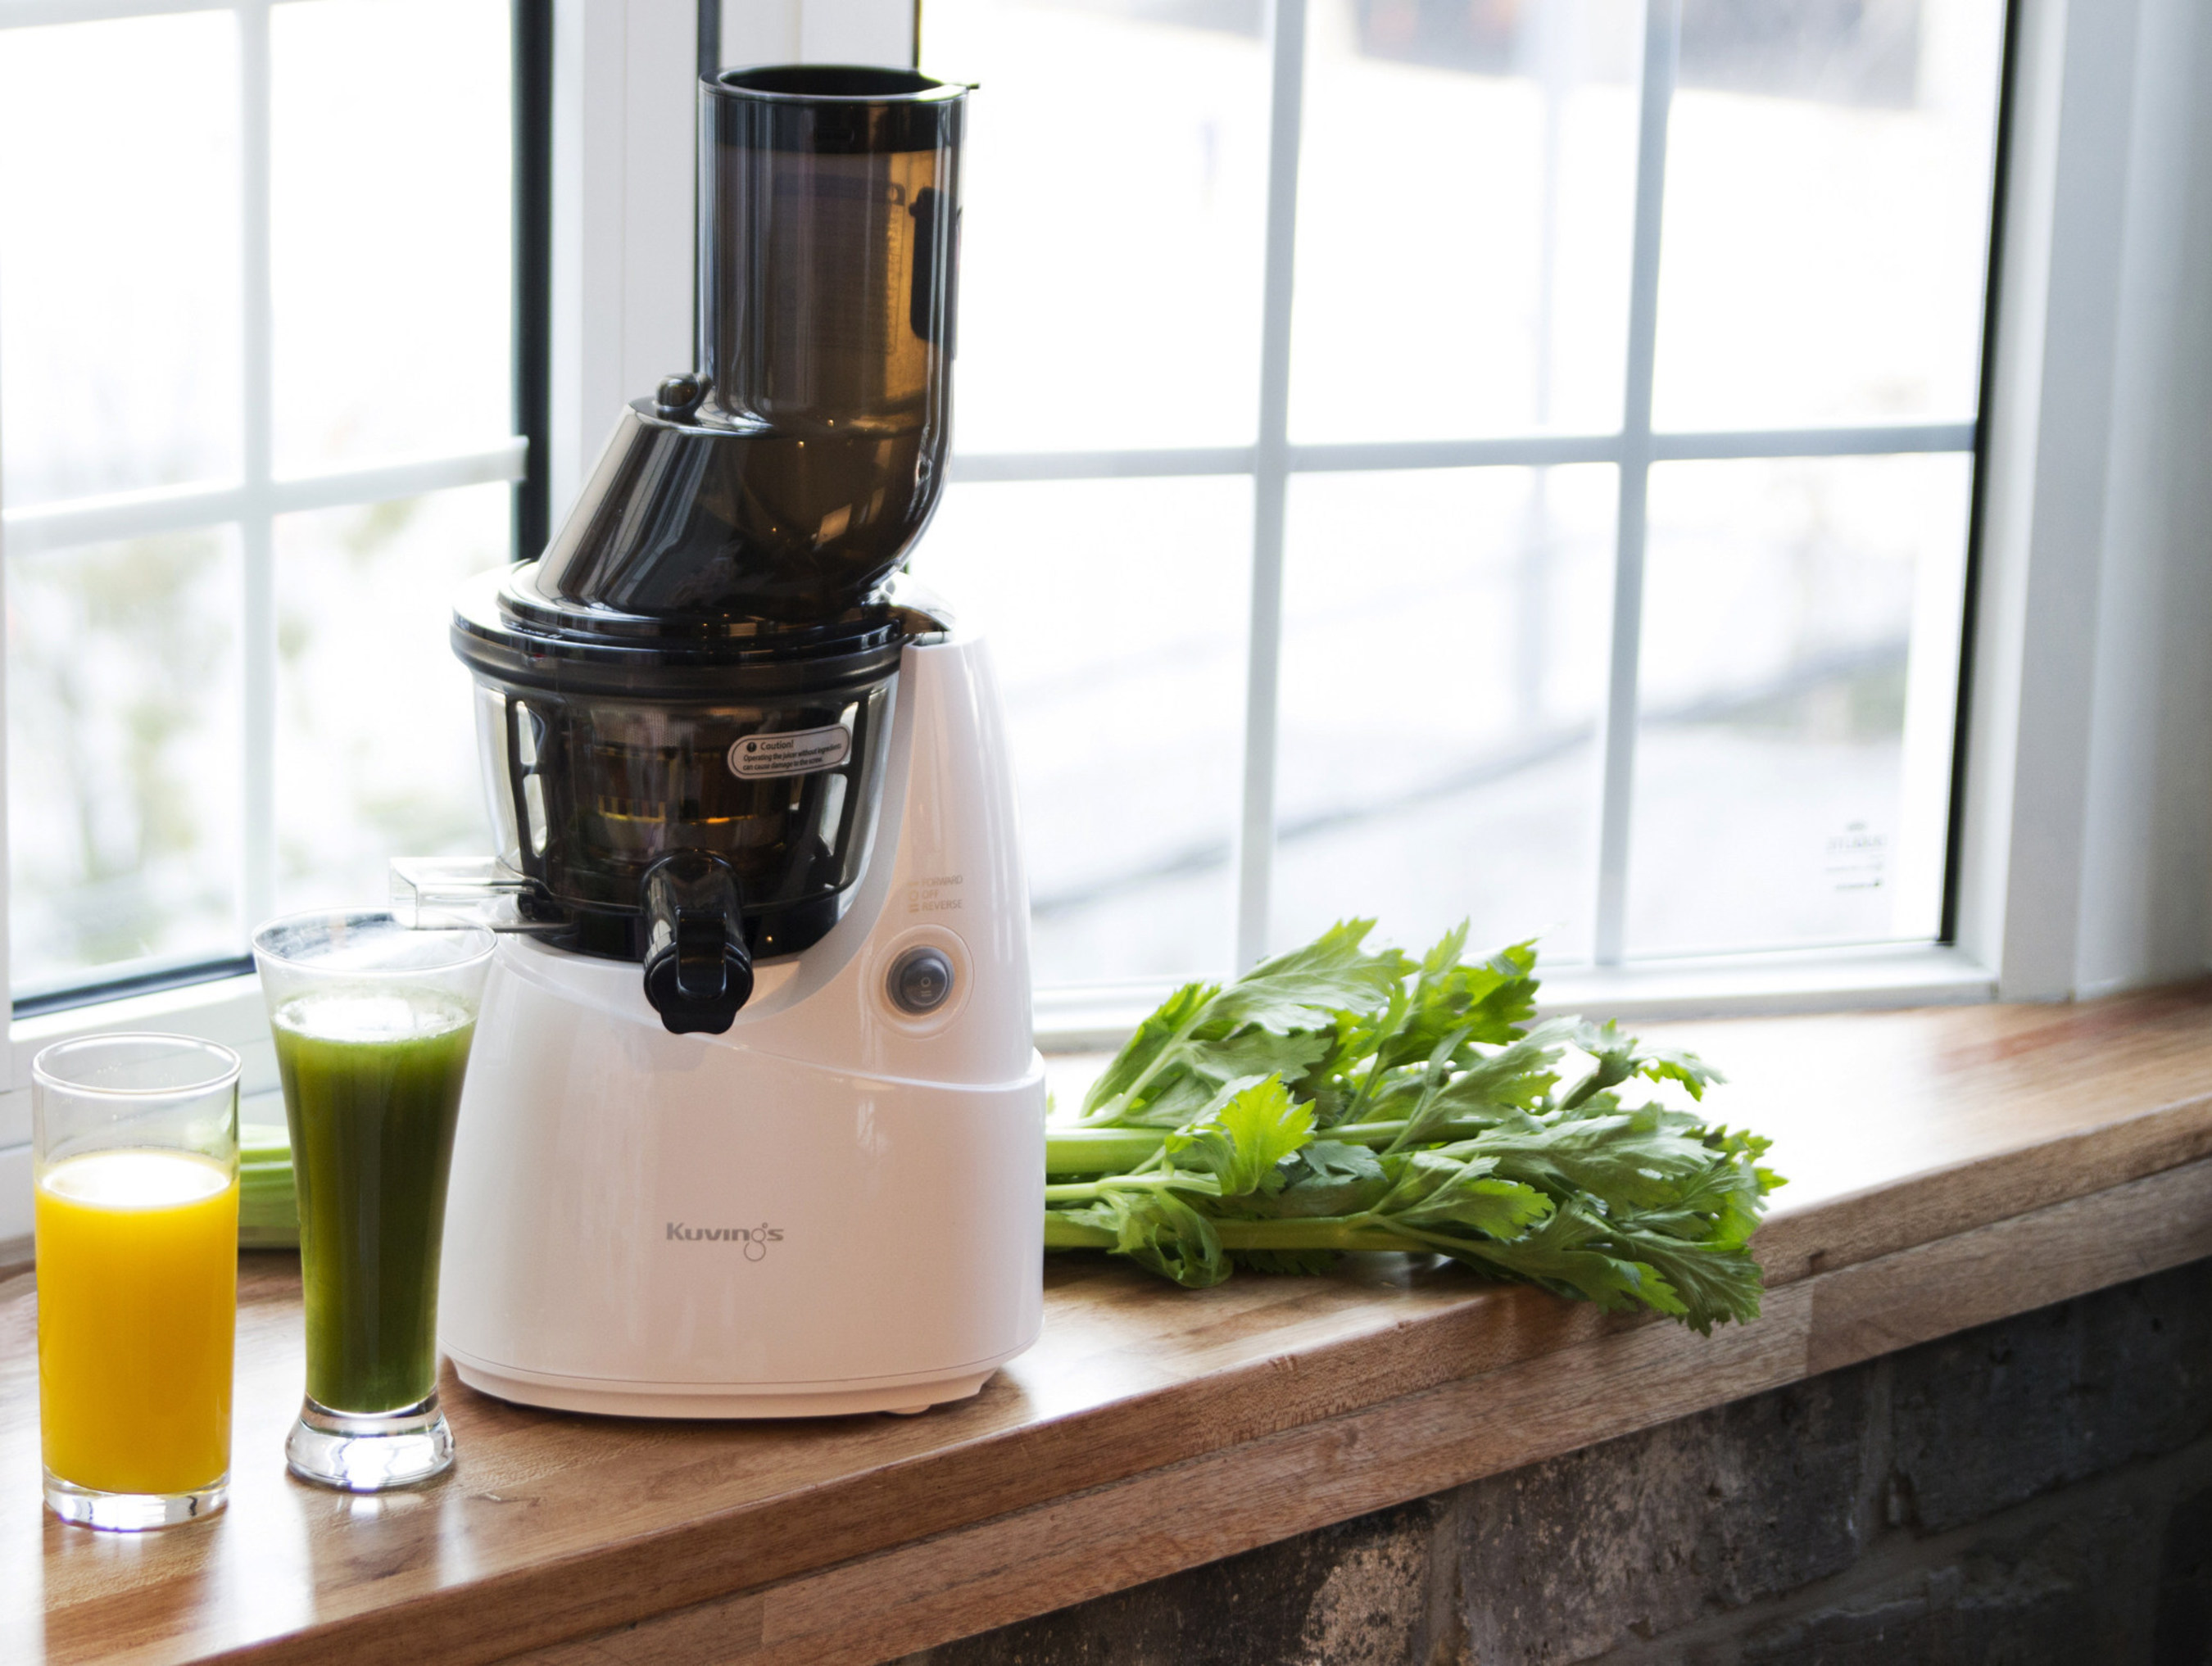 Give the gift of good health: Kuvings Whole Slow Juicer accommodates whole fruits and vegetables, reducing prep time and maximizing nutrition. Available at shopkuvings.com, WilliamsSonoma.com, BedBathandBeyond.com and Amazon.com.